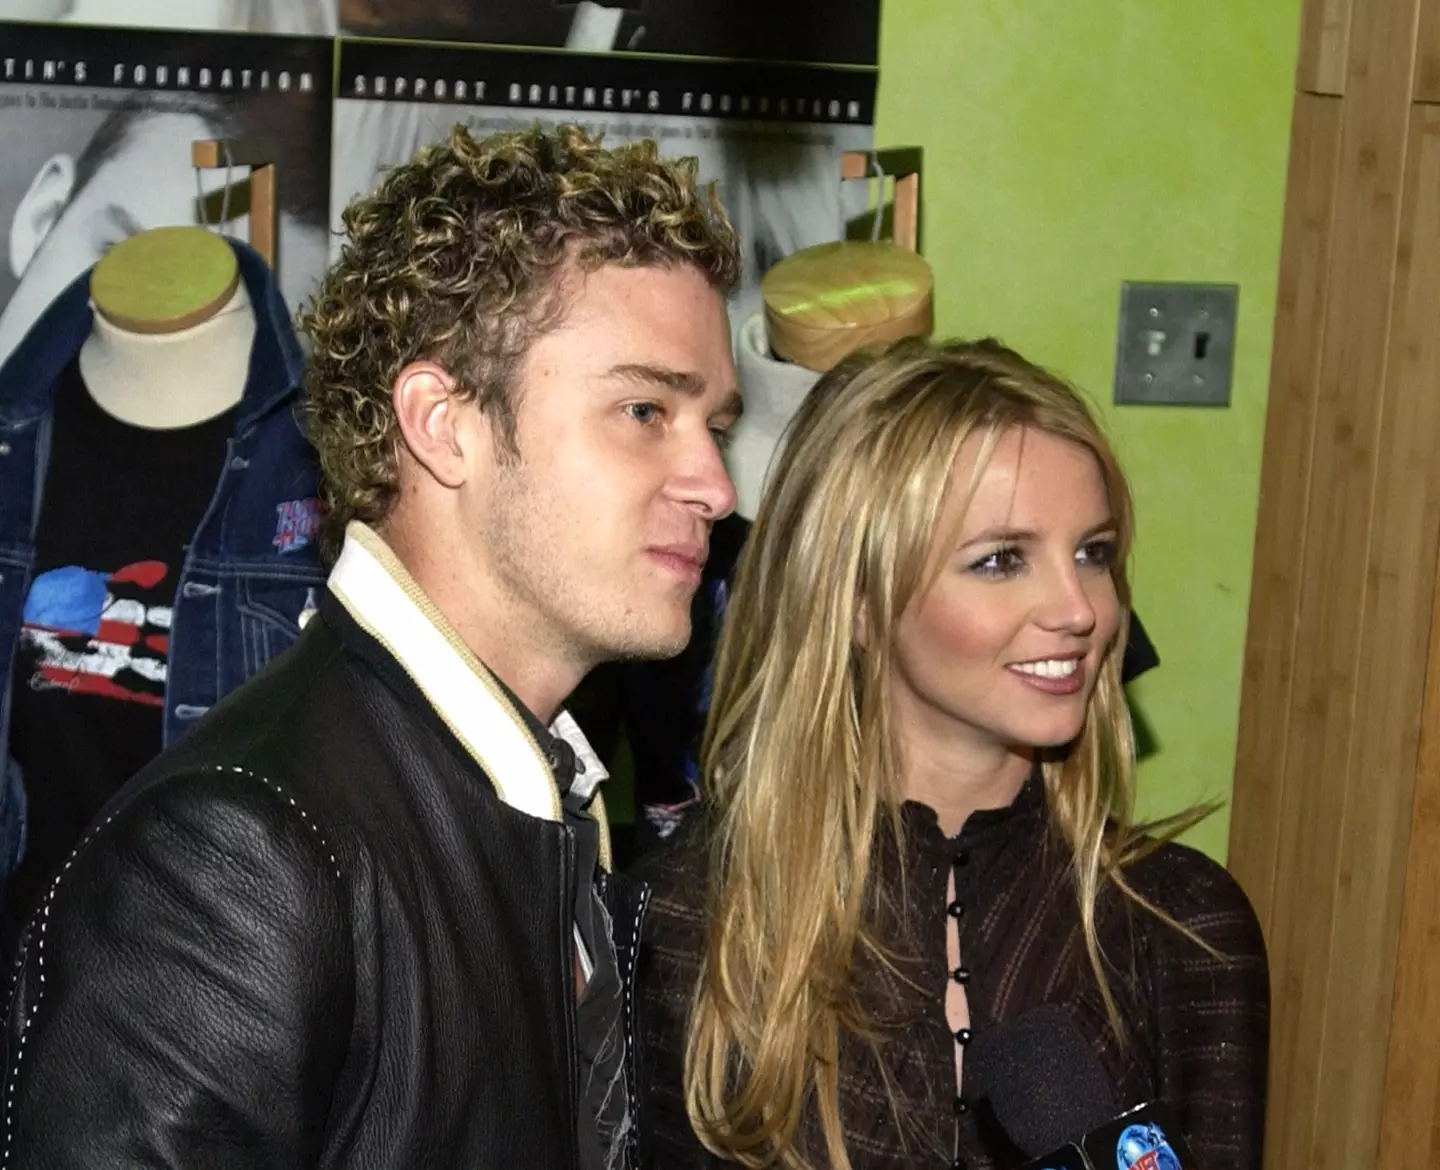 Britney and Timberlake were together in the early 2000s.